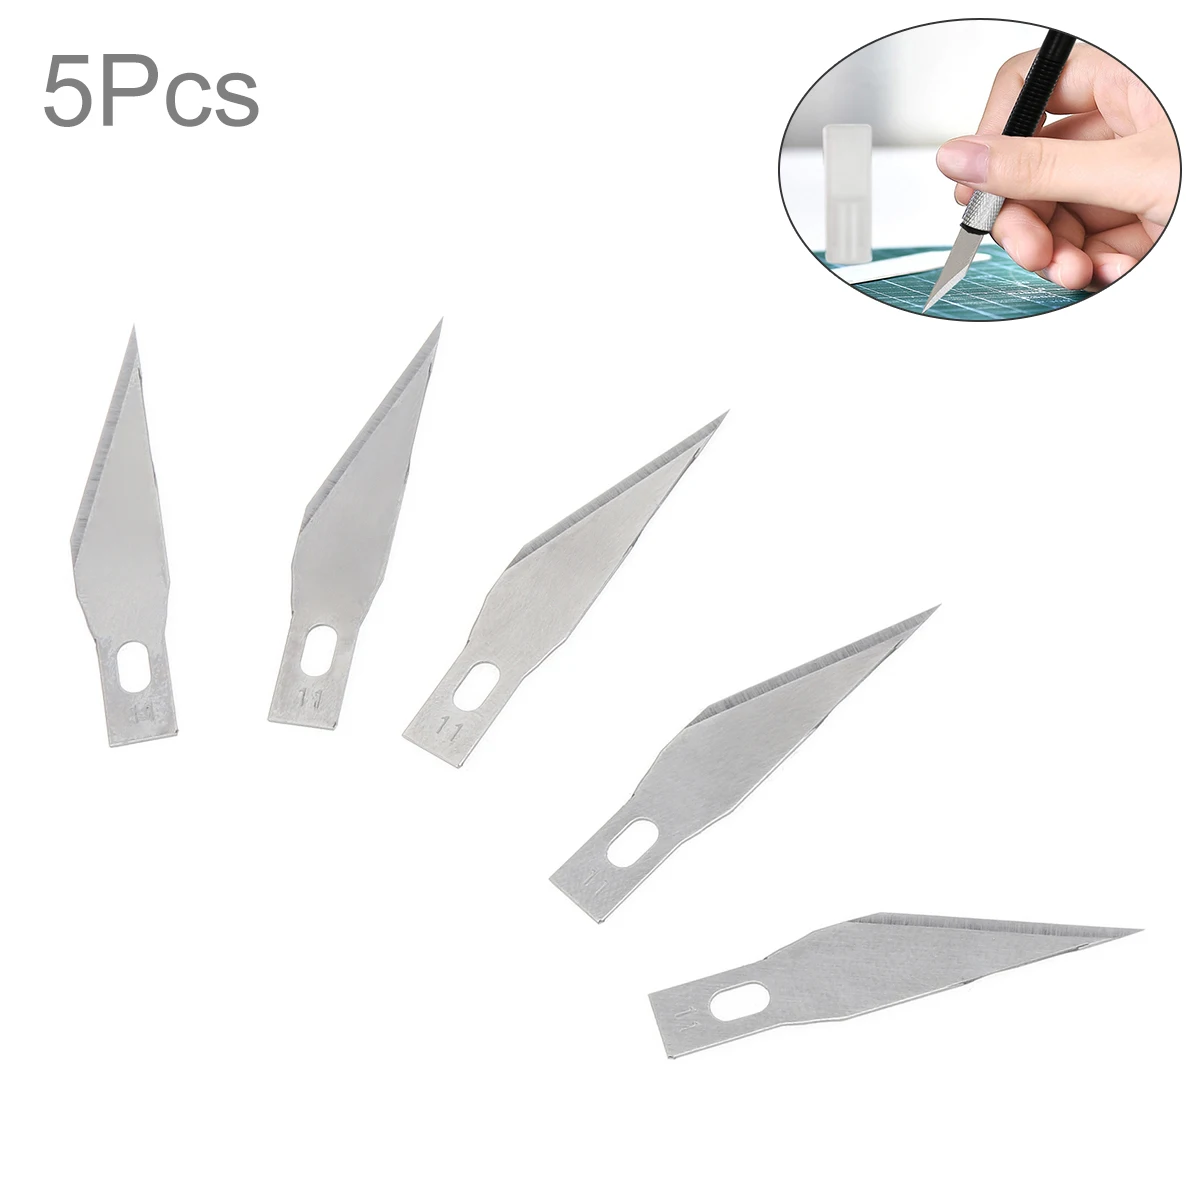 

Engraving Blades 5pcs/lot 3# 4# 11# 16# Blades Stainless Steel Metal Wood Carving Blade Replacement Surgical Scalpel Craft